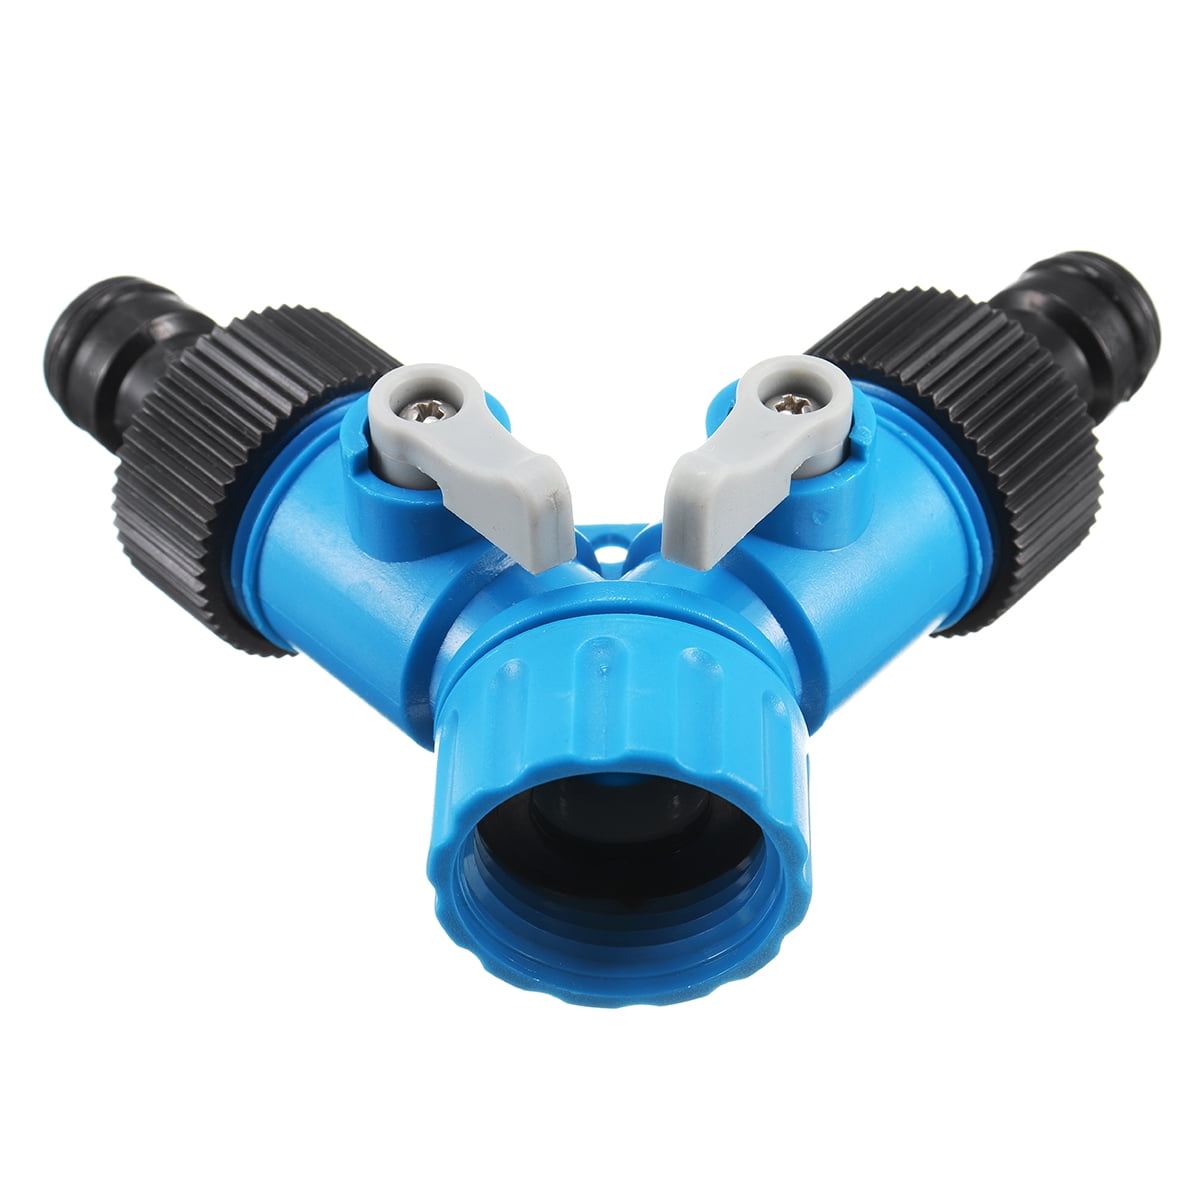 2 Way Garden Hose Splitter Tap Connector Y Adaptor Two Outlet ...